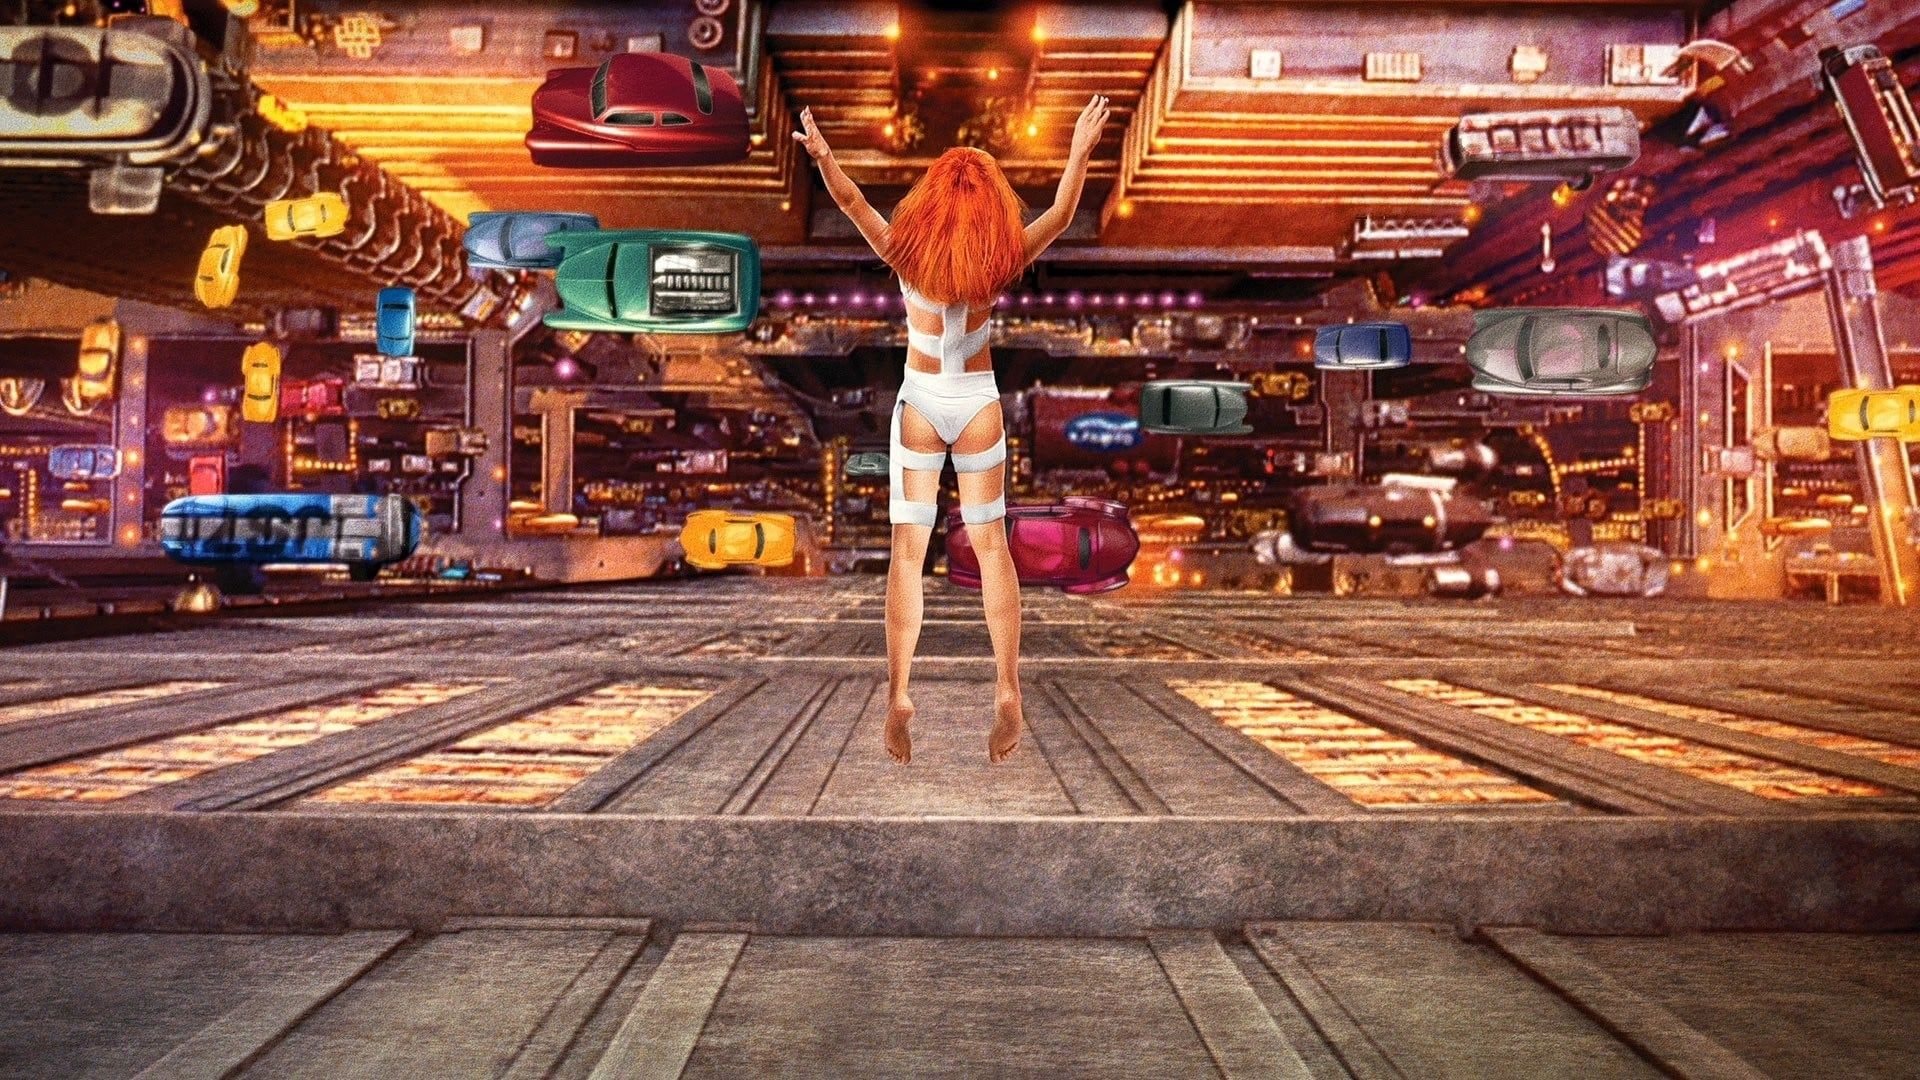 The Fifth Element Backdrop